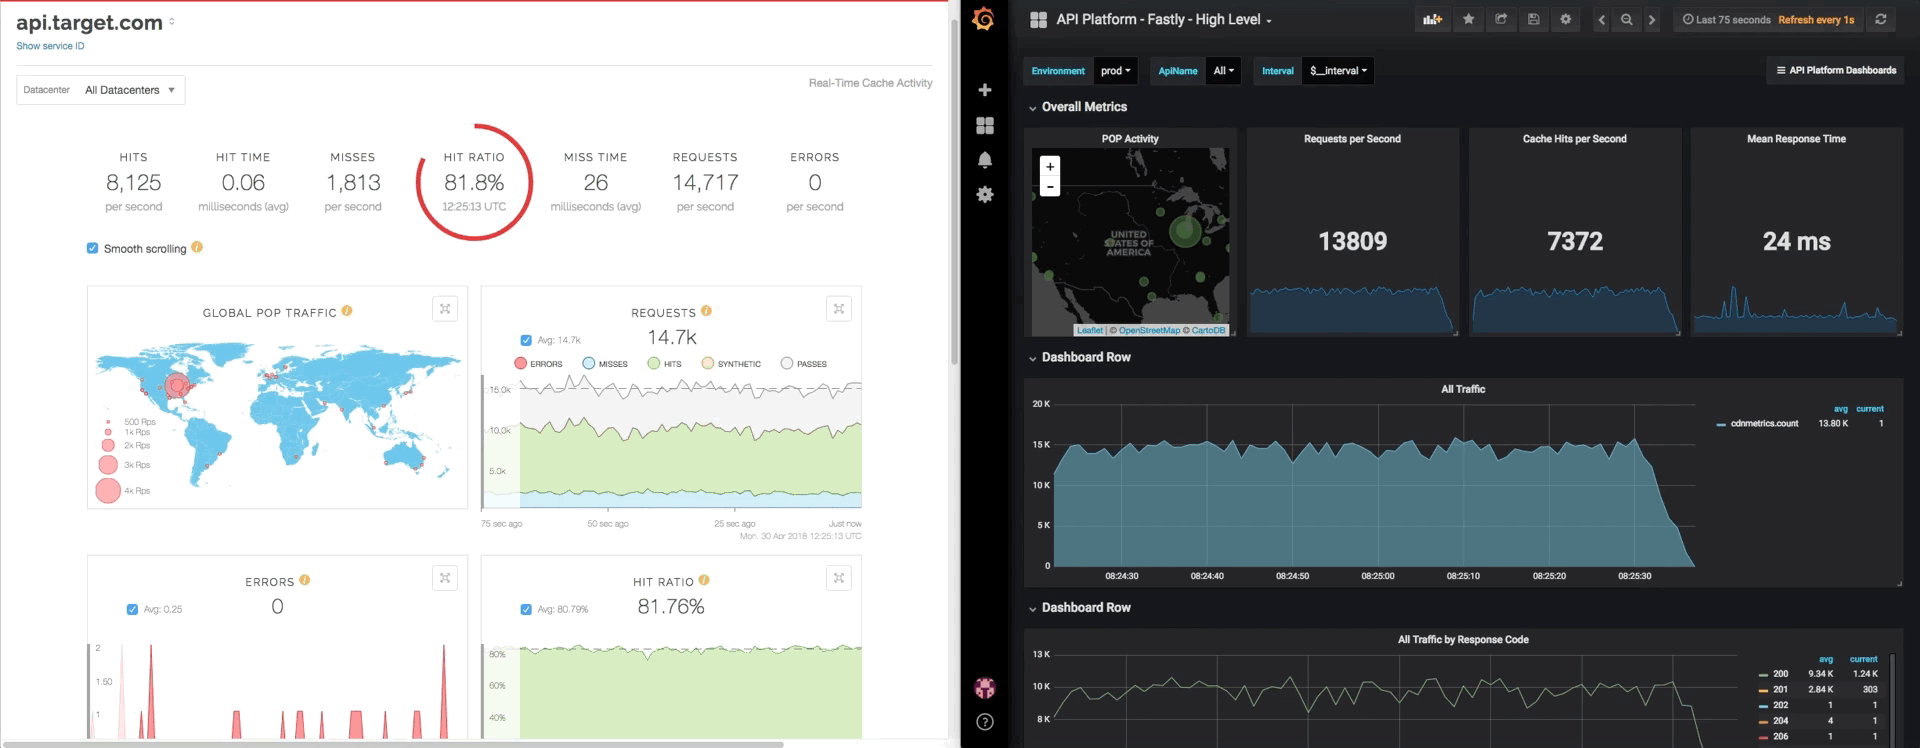 side by side image with the left side showing an overview of a api.target.com dashboard showing a hit ratio of 81.8%. The right side shows a high level view of Target's API platform in Fastly, displaying overall metrics including requests per second (13809).